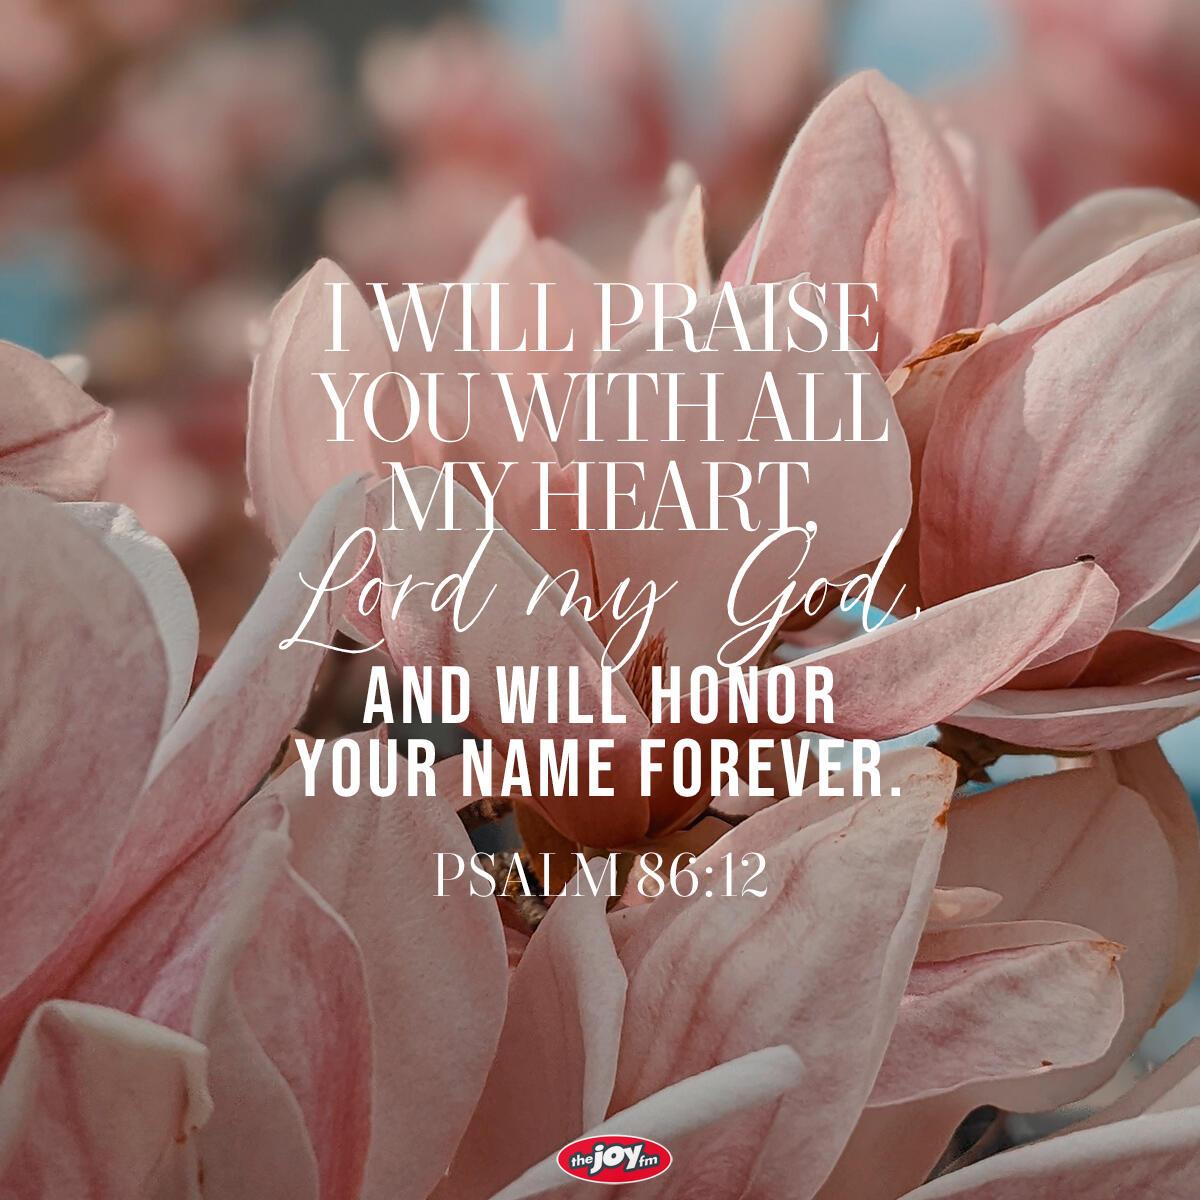 Psalm 86:12 - Verse of the Day